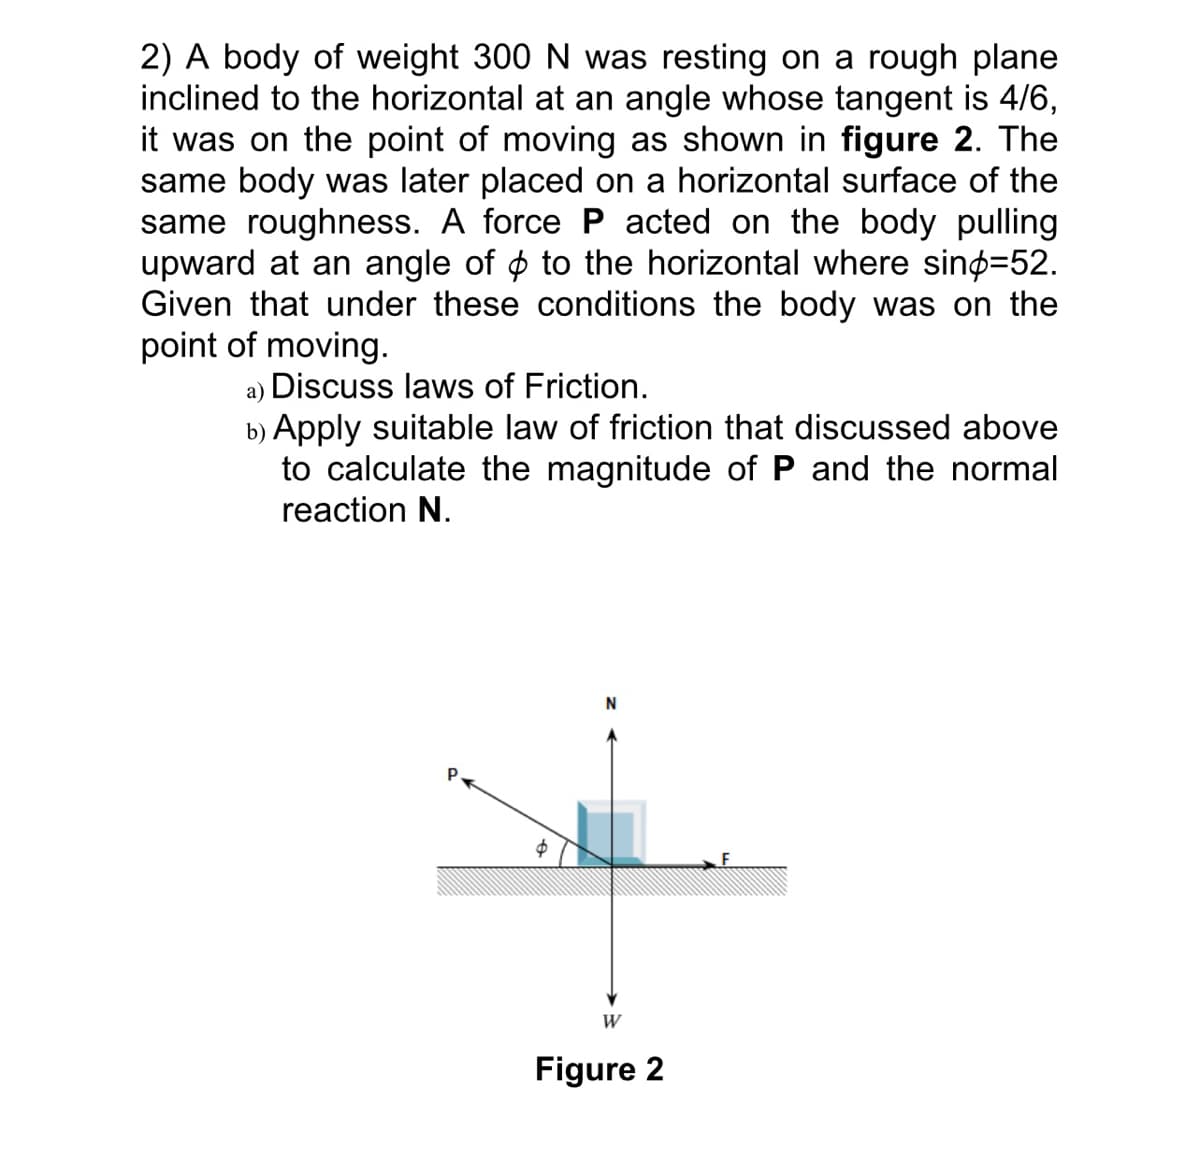 2) A body of weight 300 N was resting on a rough plane
inclined to the horizontal at an angle whose tangent is 4/6,
it was on the point of moving as shown in figure 2. The
same body was later placed on a horizontal surface of the
same roughness. A force P acted on the body pulling
upward at an angle of ☀ to the horizontal where sind=52.
Given that under these conditions the body was on the
point of moving.
a) Discuss laws of Friction.
b) Apply suitable law of friction that discussed above
to calculate the magnitude of P and the normal
reaction N.
$
W
Figure 2